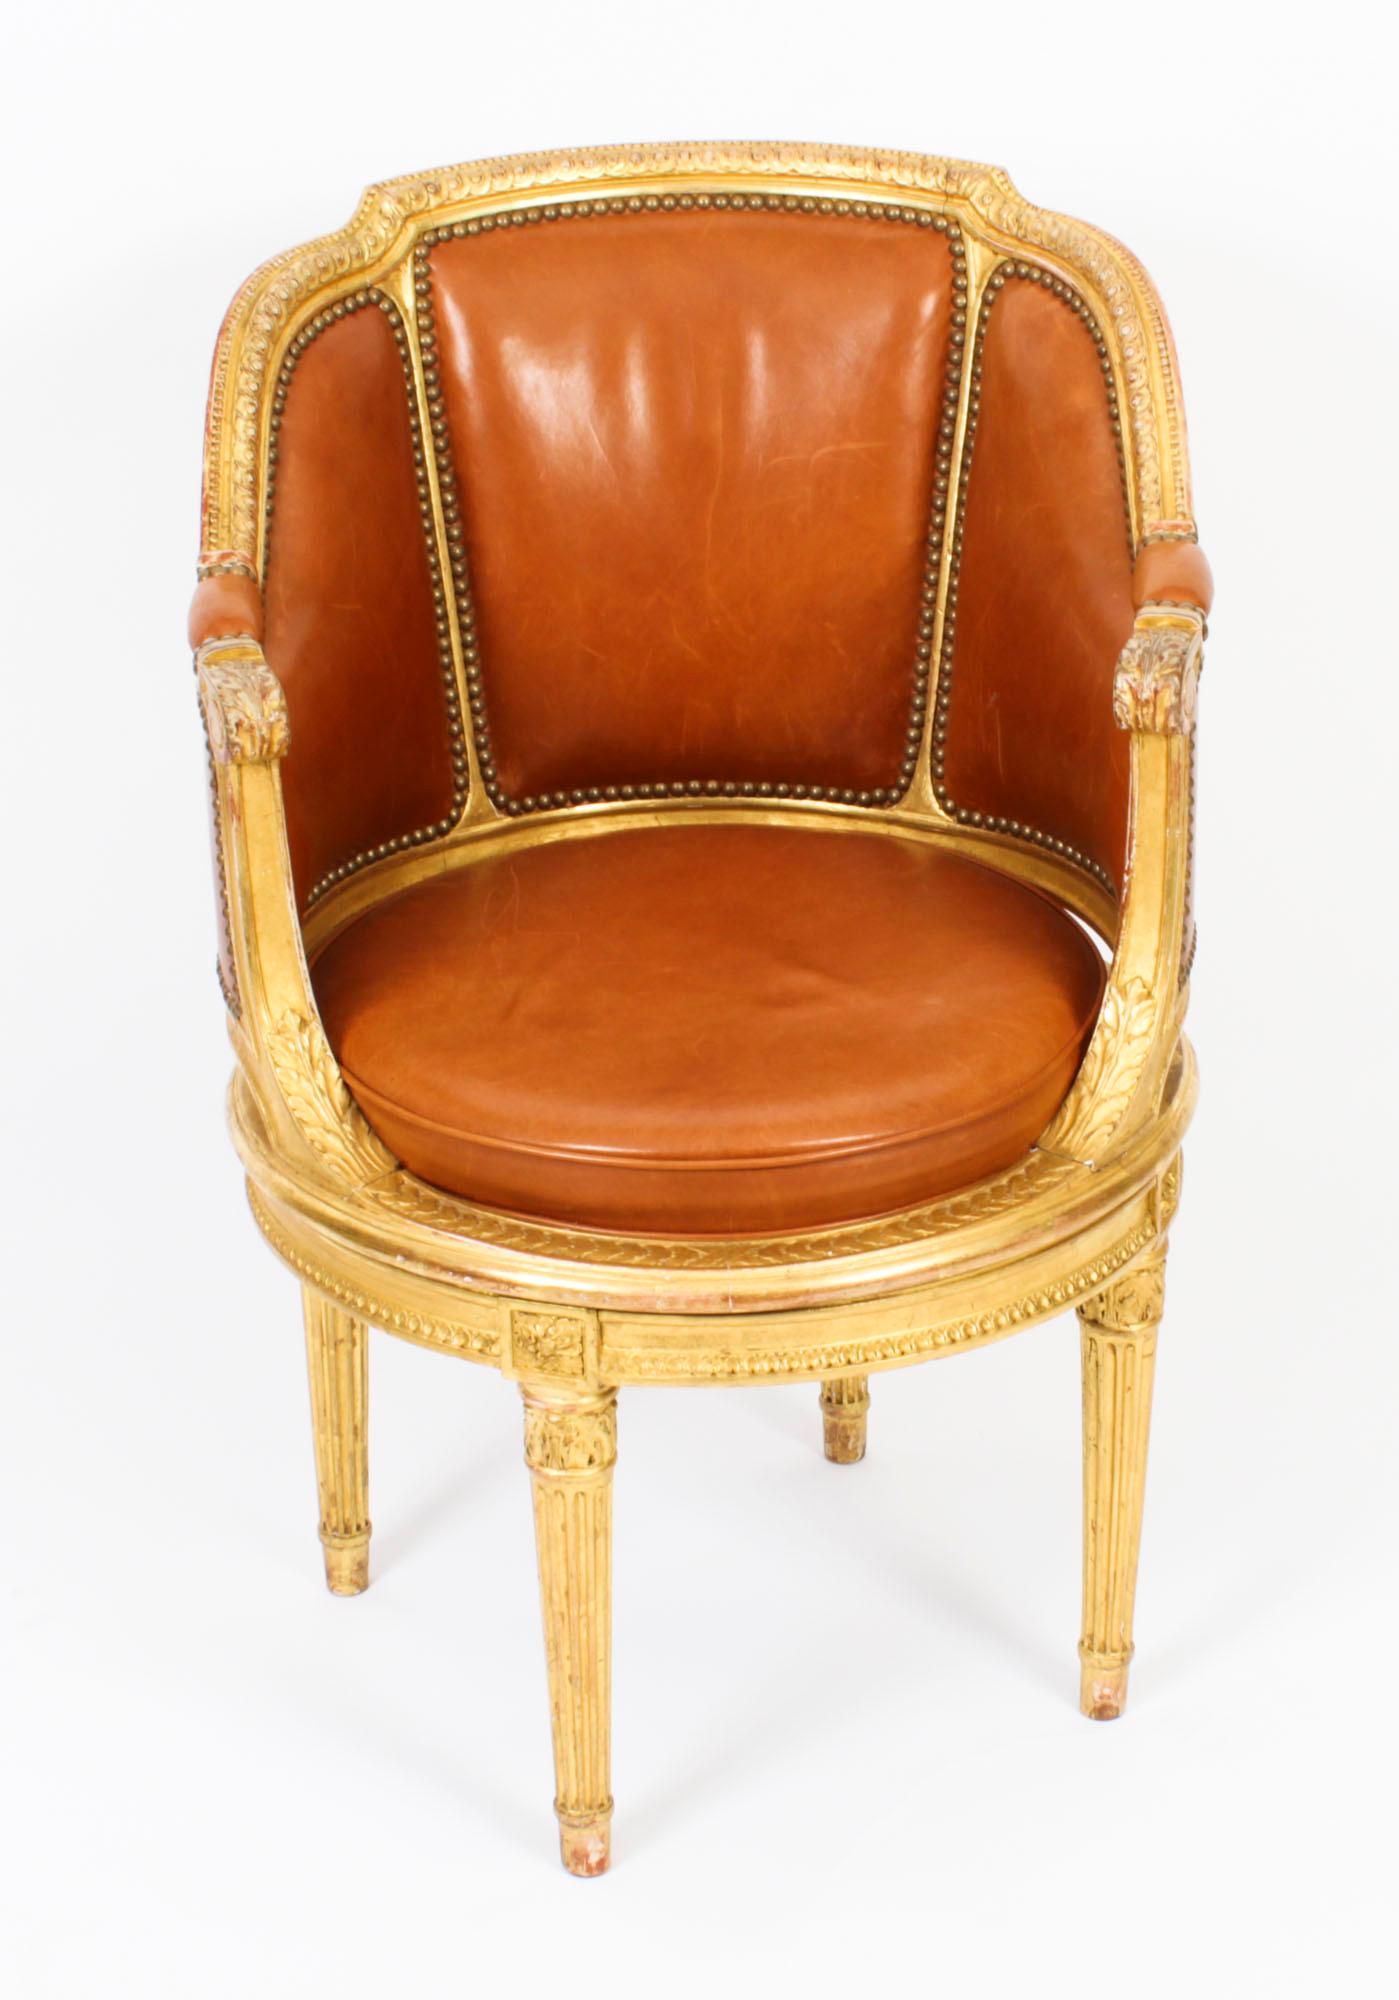 This is a fine and elegant antique French Louis revival revolving Fauteuil de Bureau / desk chair, circa 1860 in date.
 
The chair features guilloche, entrelac, beaded and acanthus carved frames, the rotating seat is above a lotus leaf moulded